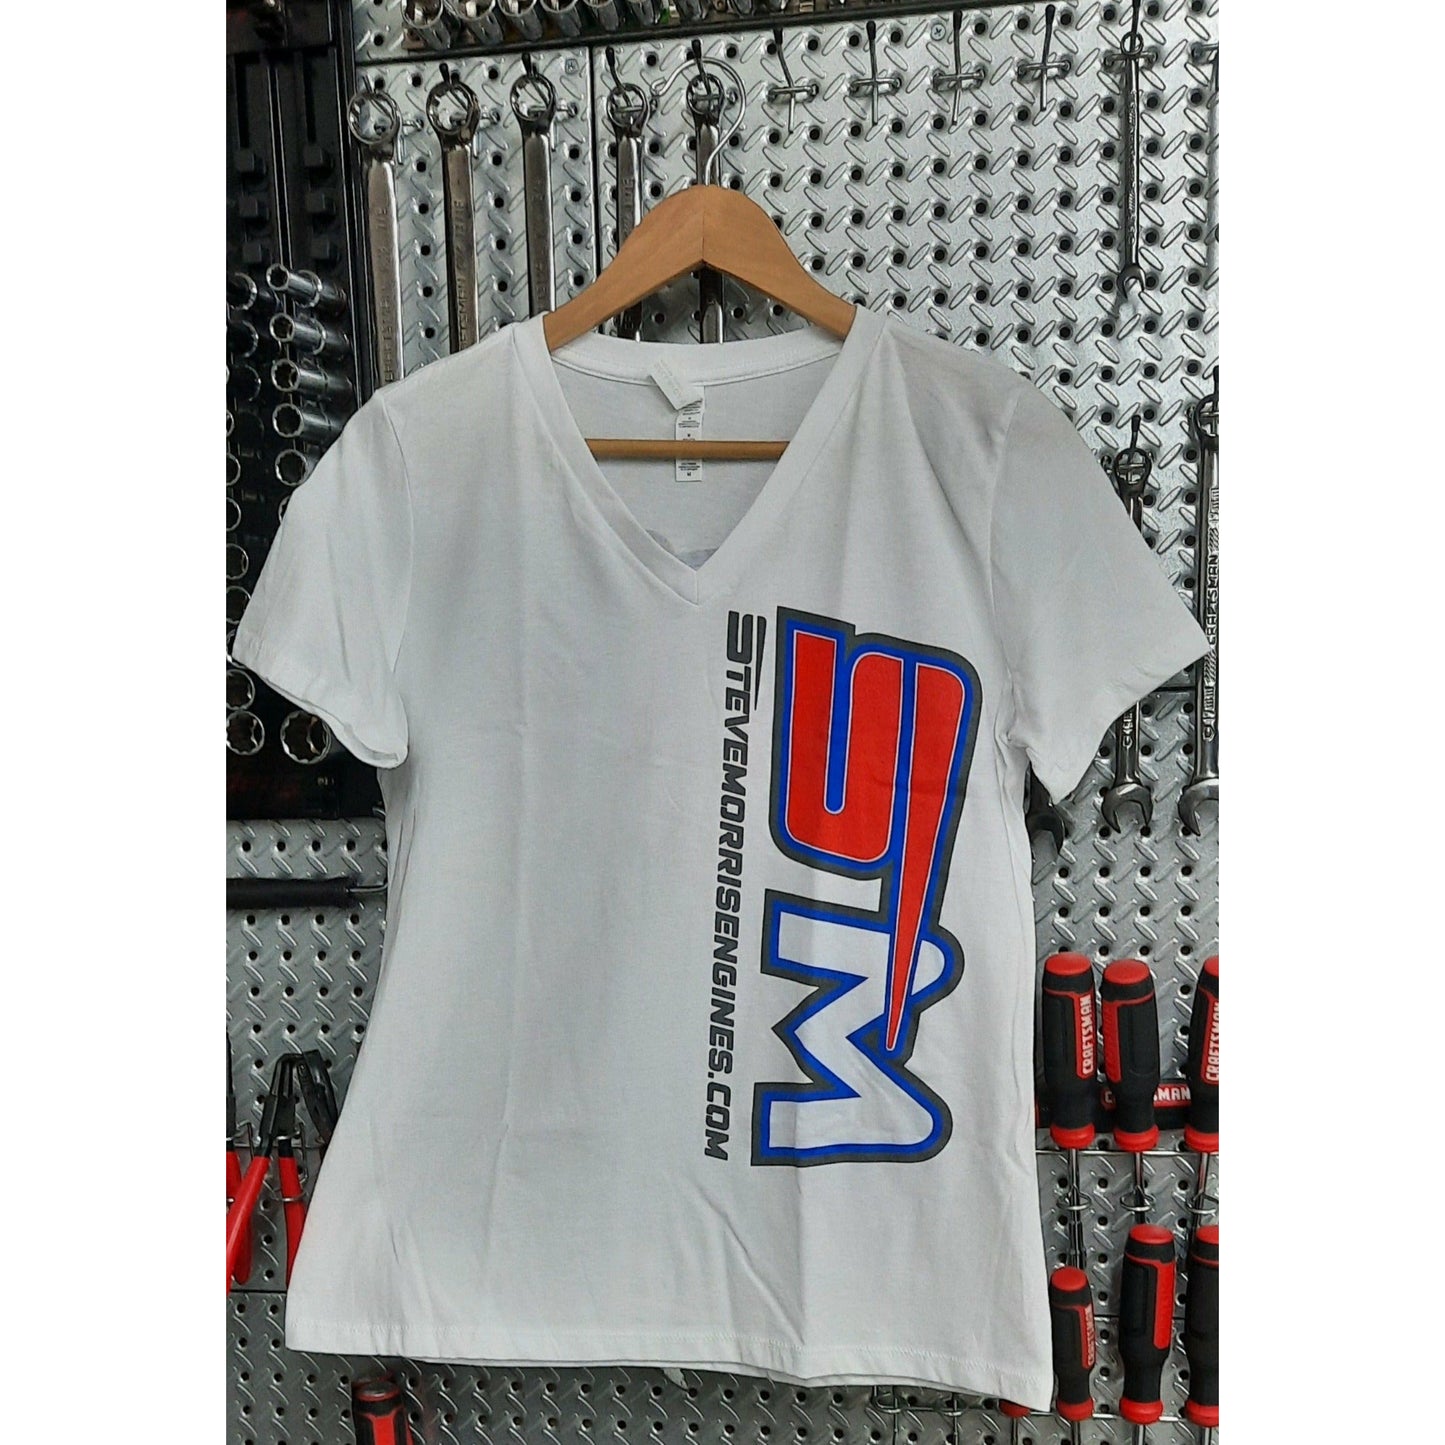 Ladies V-Neck White *CLOSEOUT PRICED* Small Only